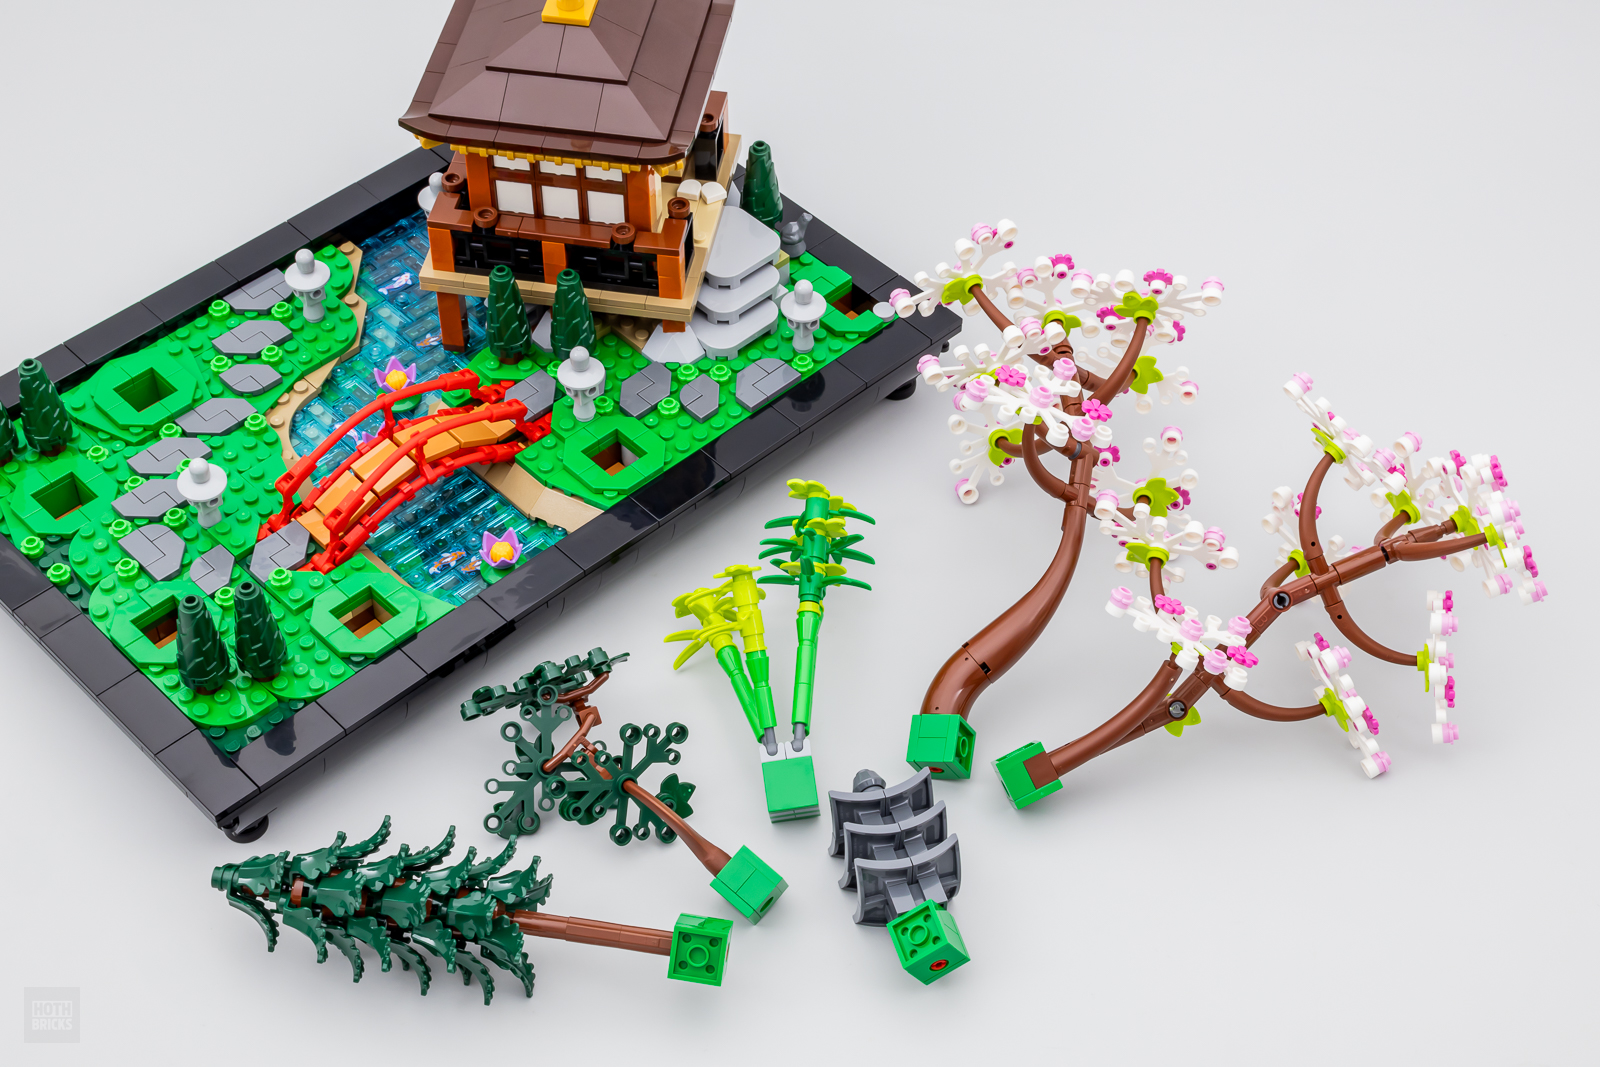 LEGO 10315 Tranquil Garden adds a touch of Japanese zen to your